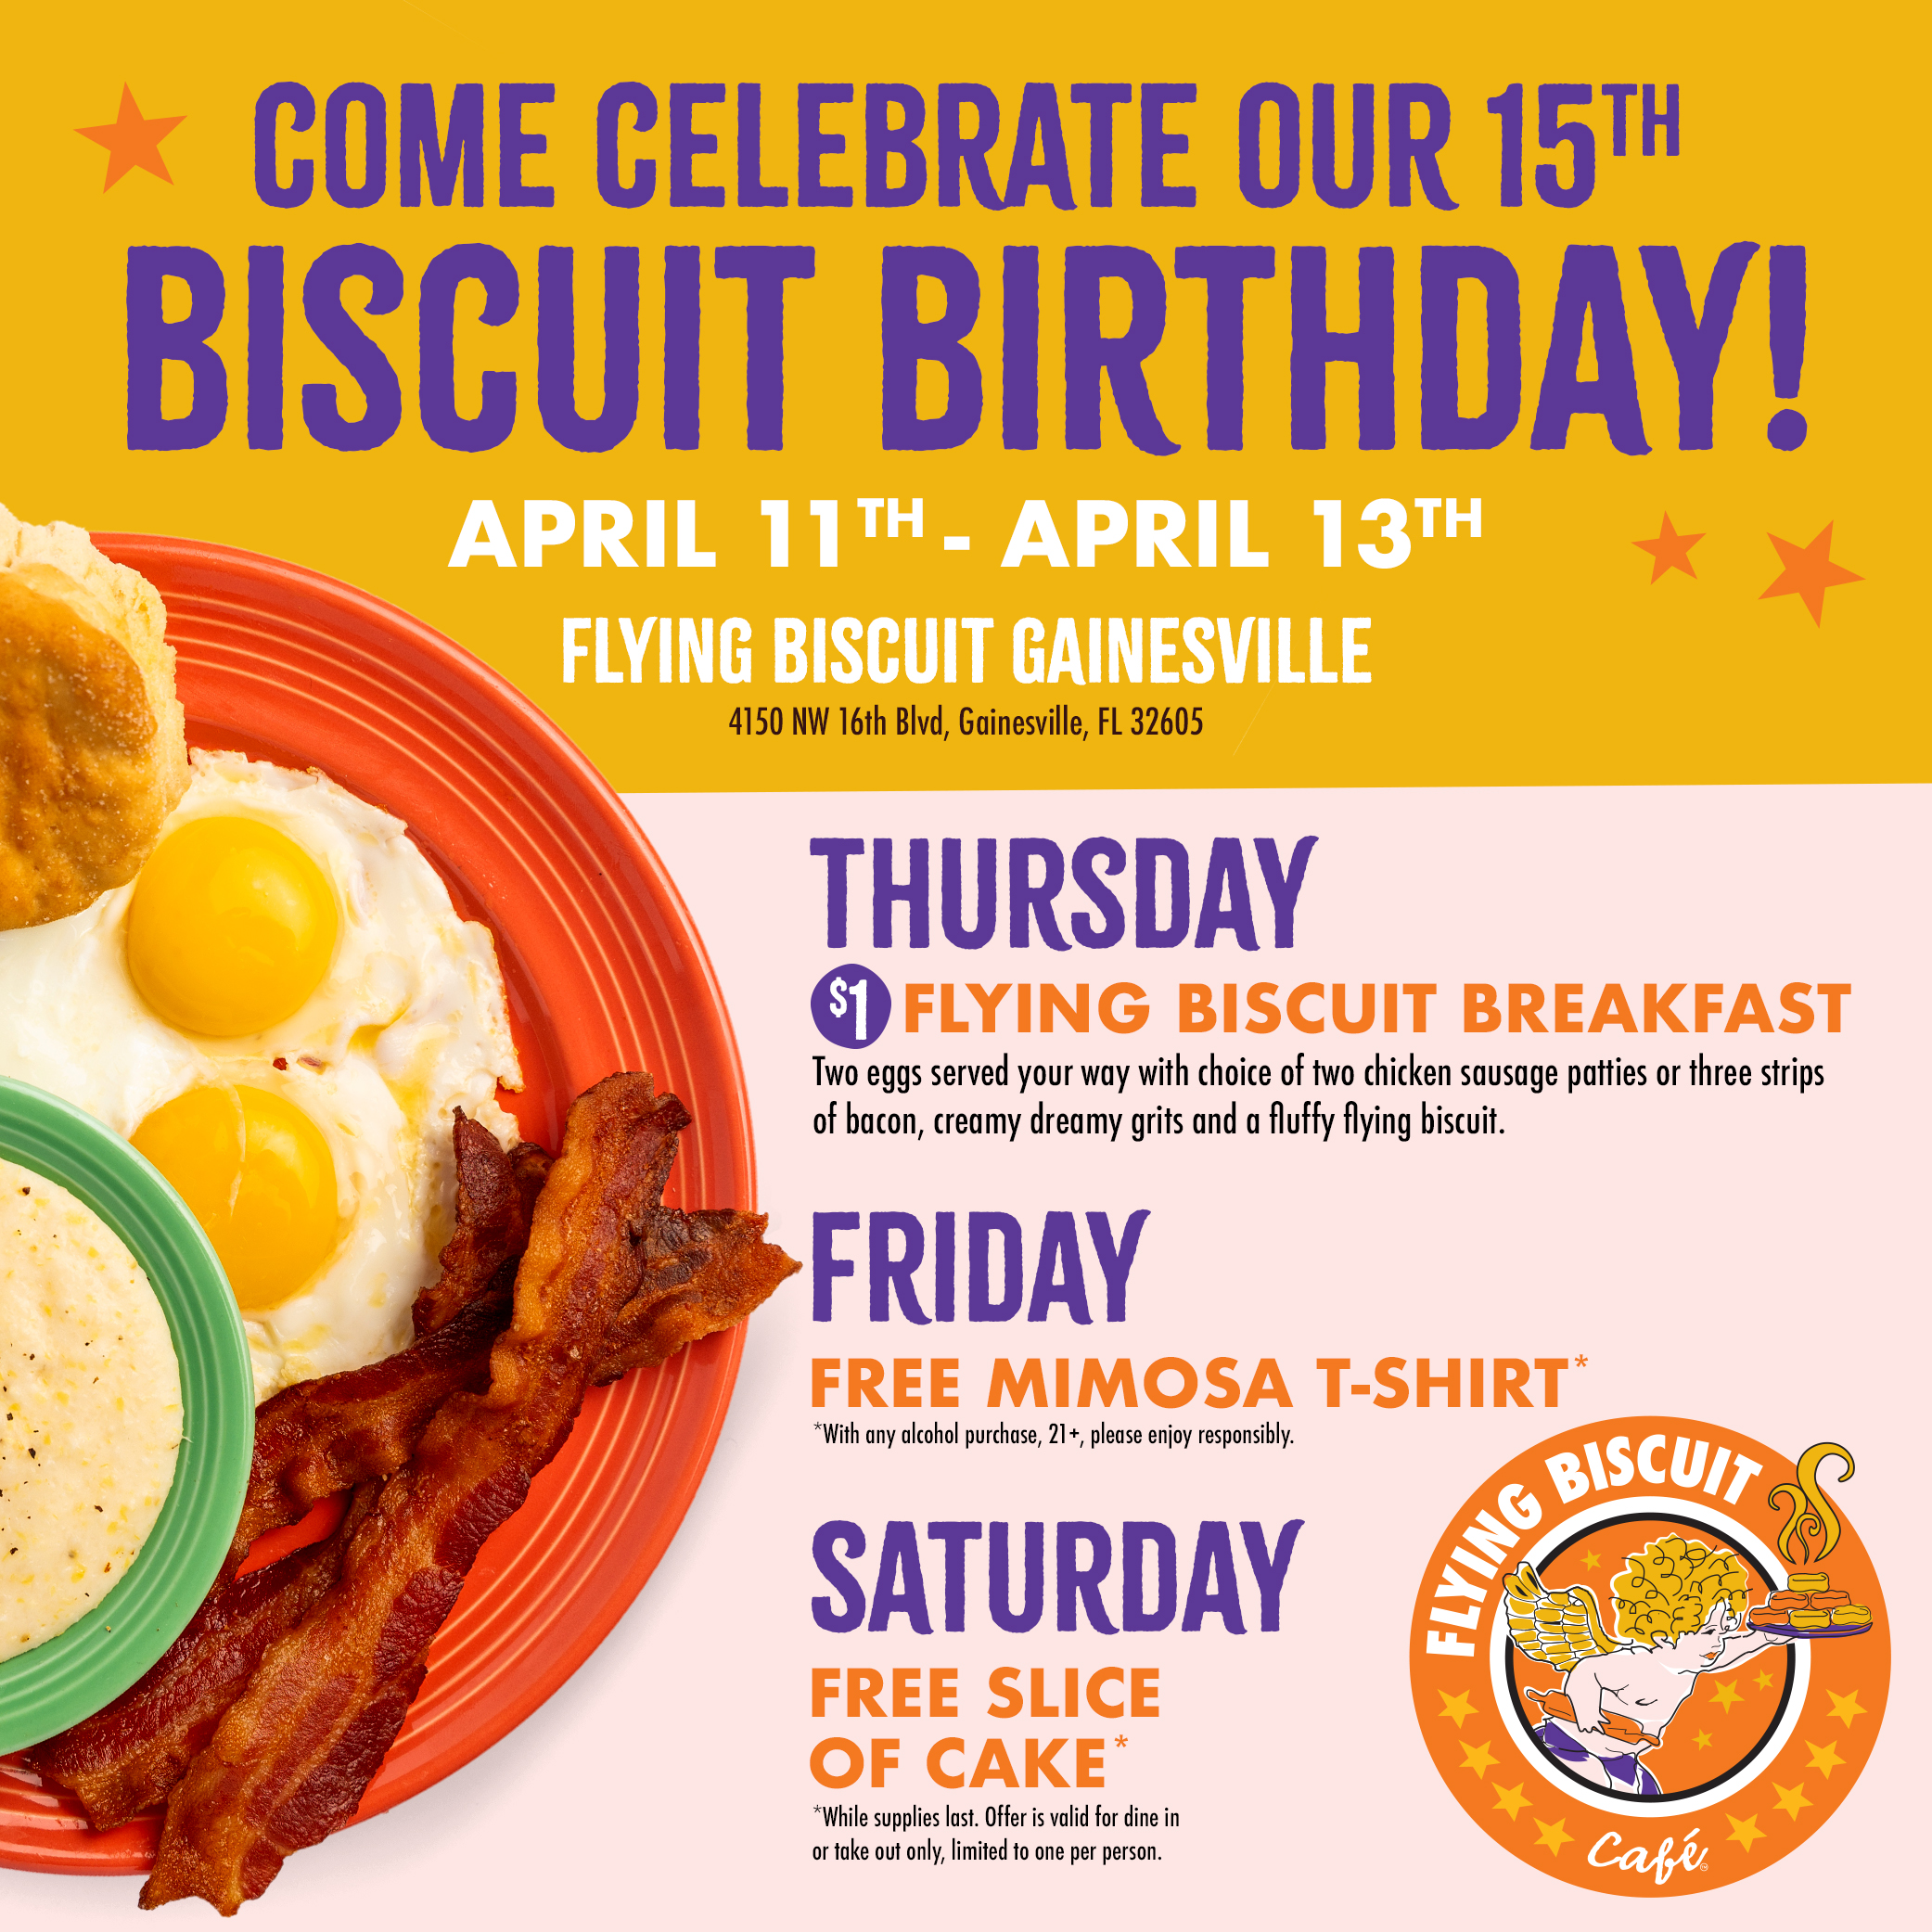 Flying Biscuit Gainesville 15th Anniversary